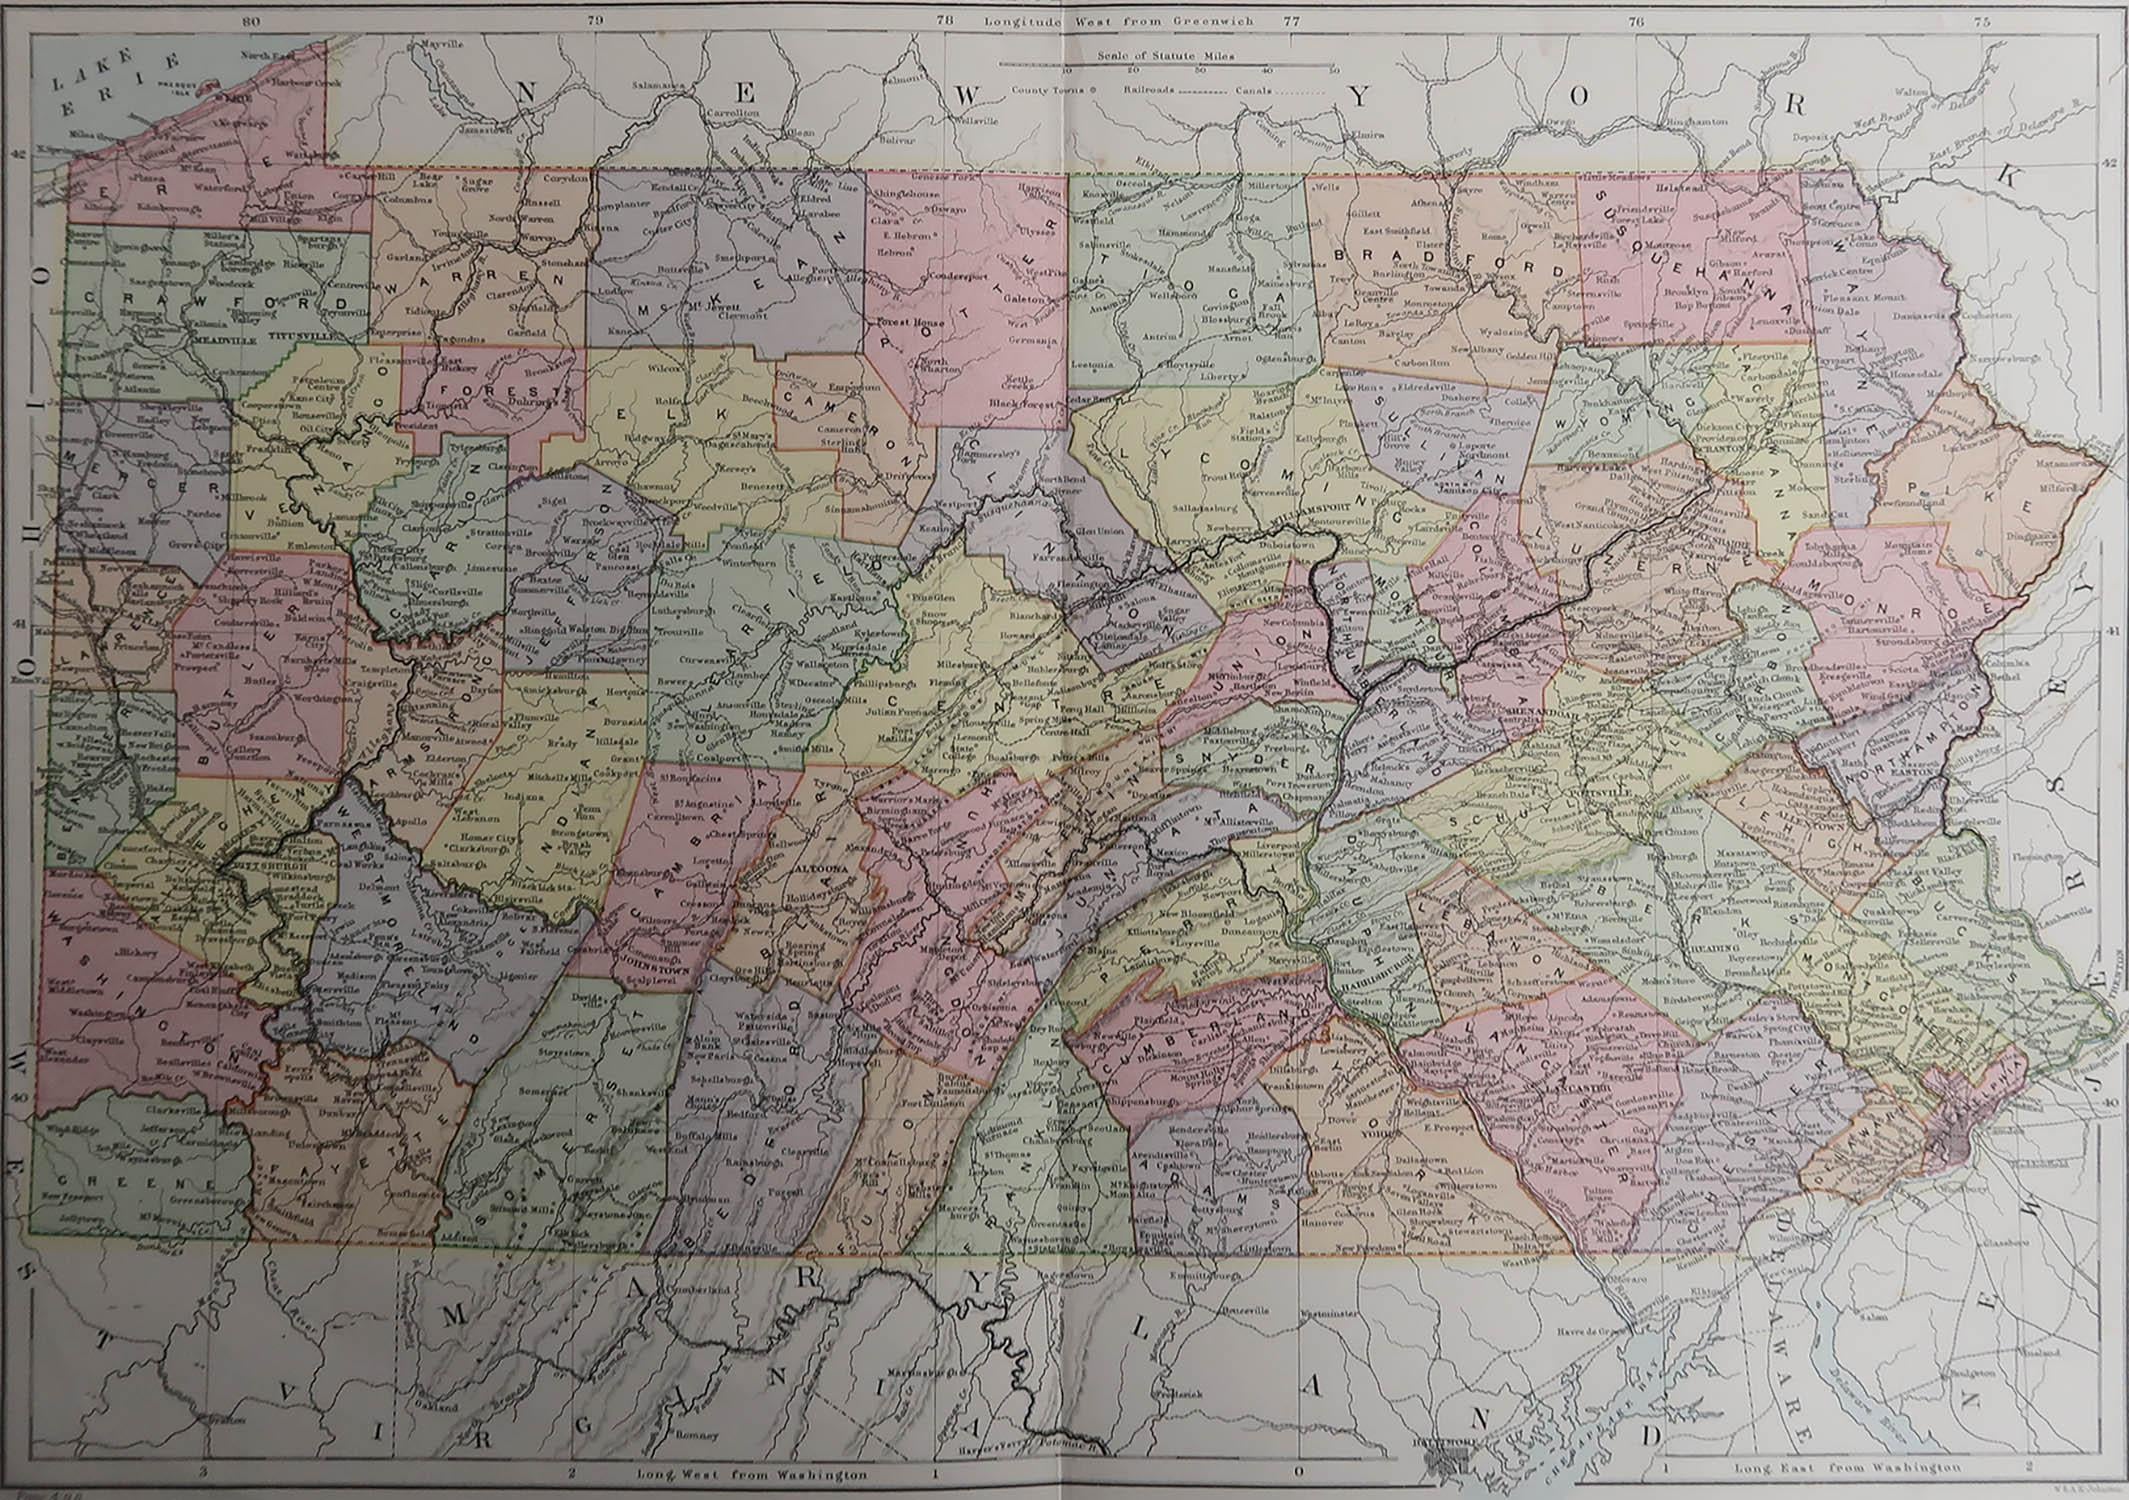 Great map of Pennsylvania

Drawn and Engraved by W. & A.K. Johnston

Published By A & C Black, Edinburgh.

Original colour

Unframed.

Repair to a minor tear on bottom edge.








